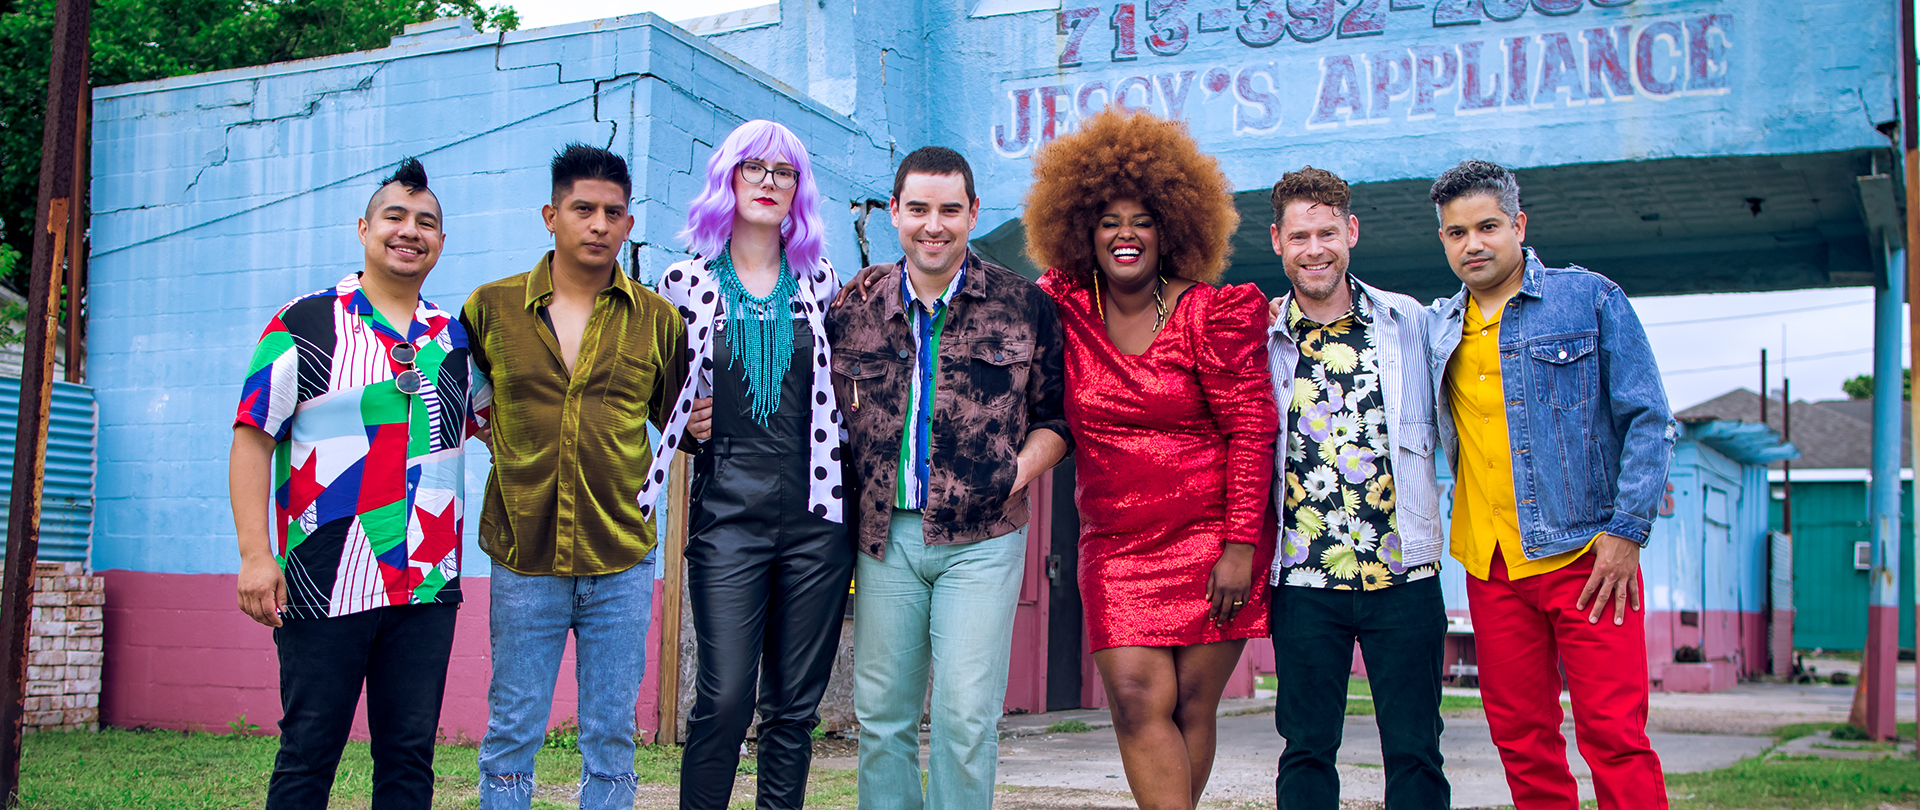 Promotional group photo of The Suffers